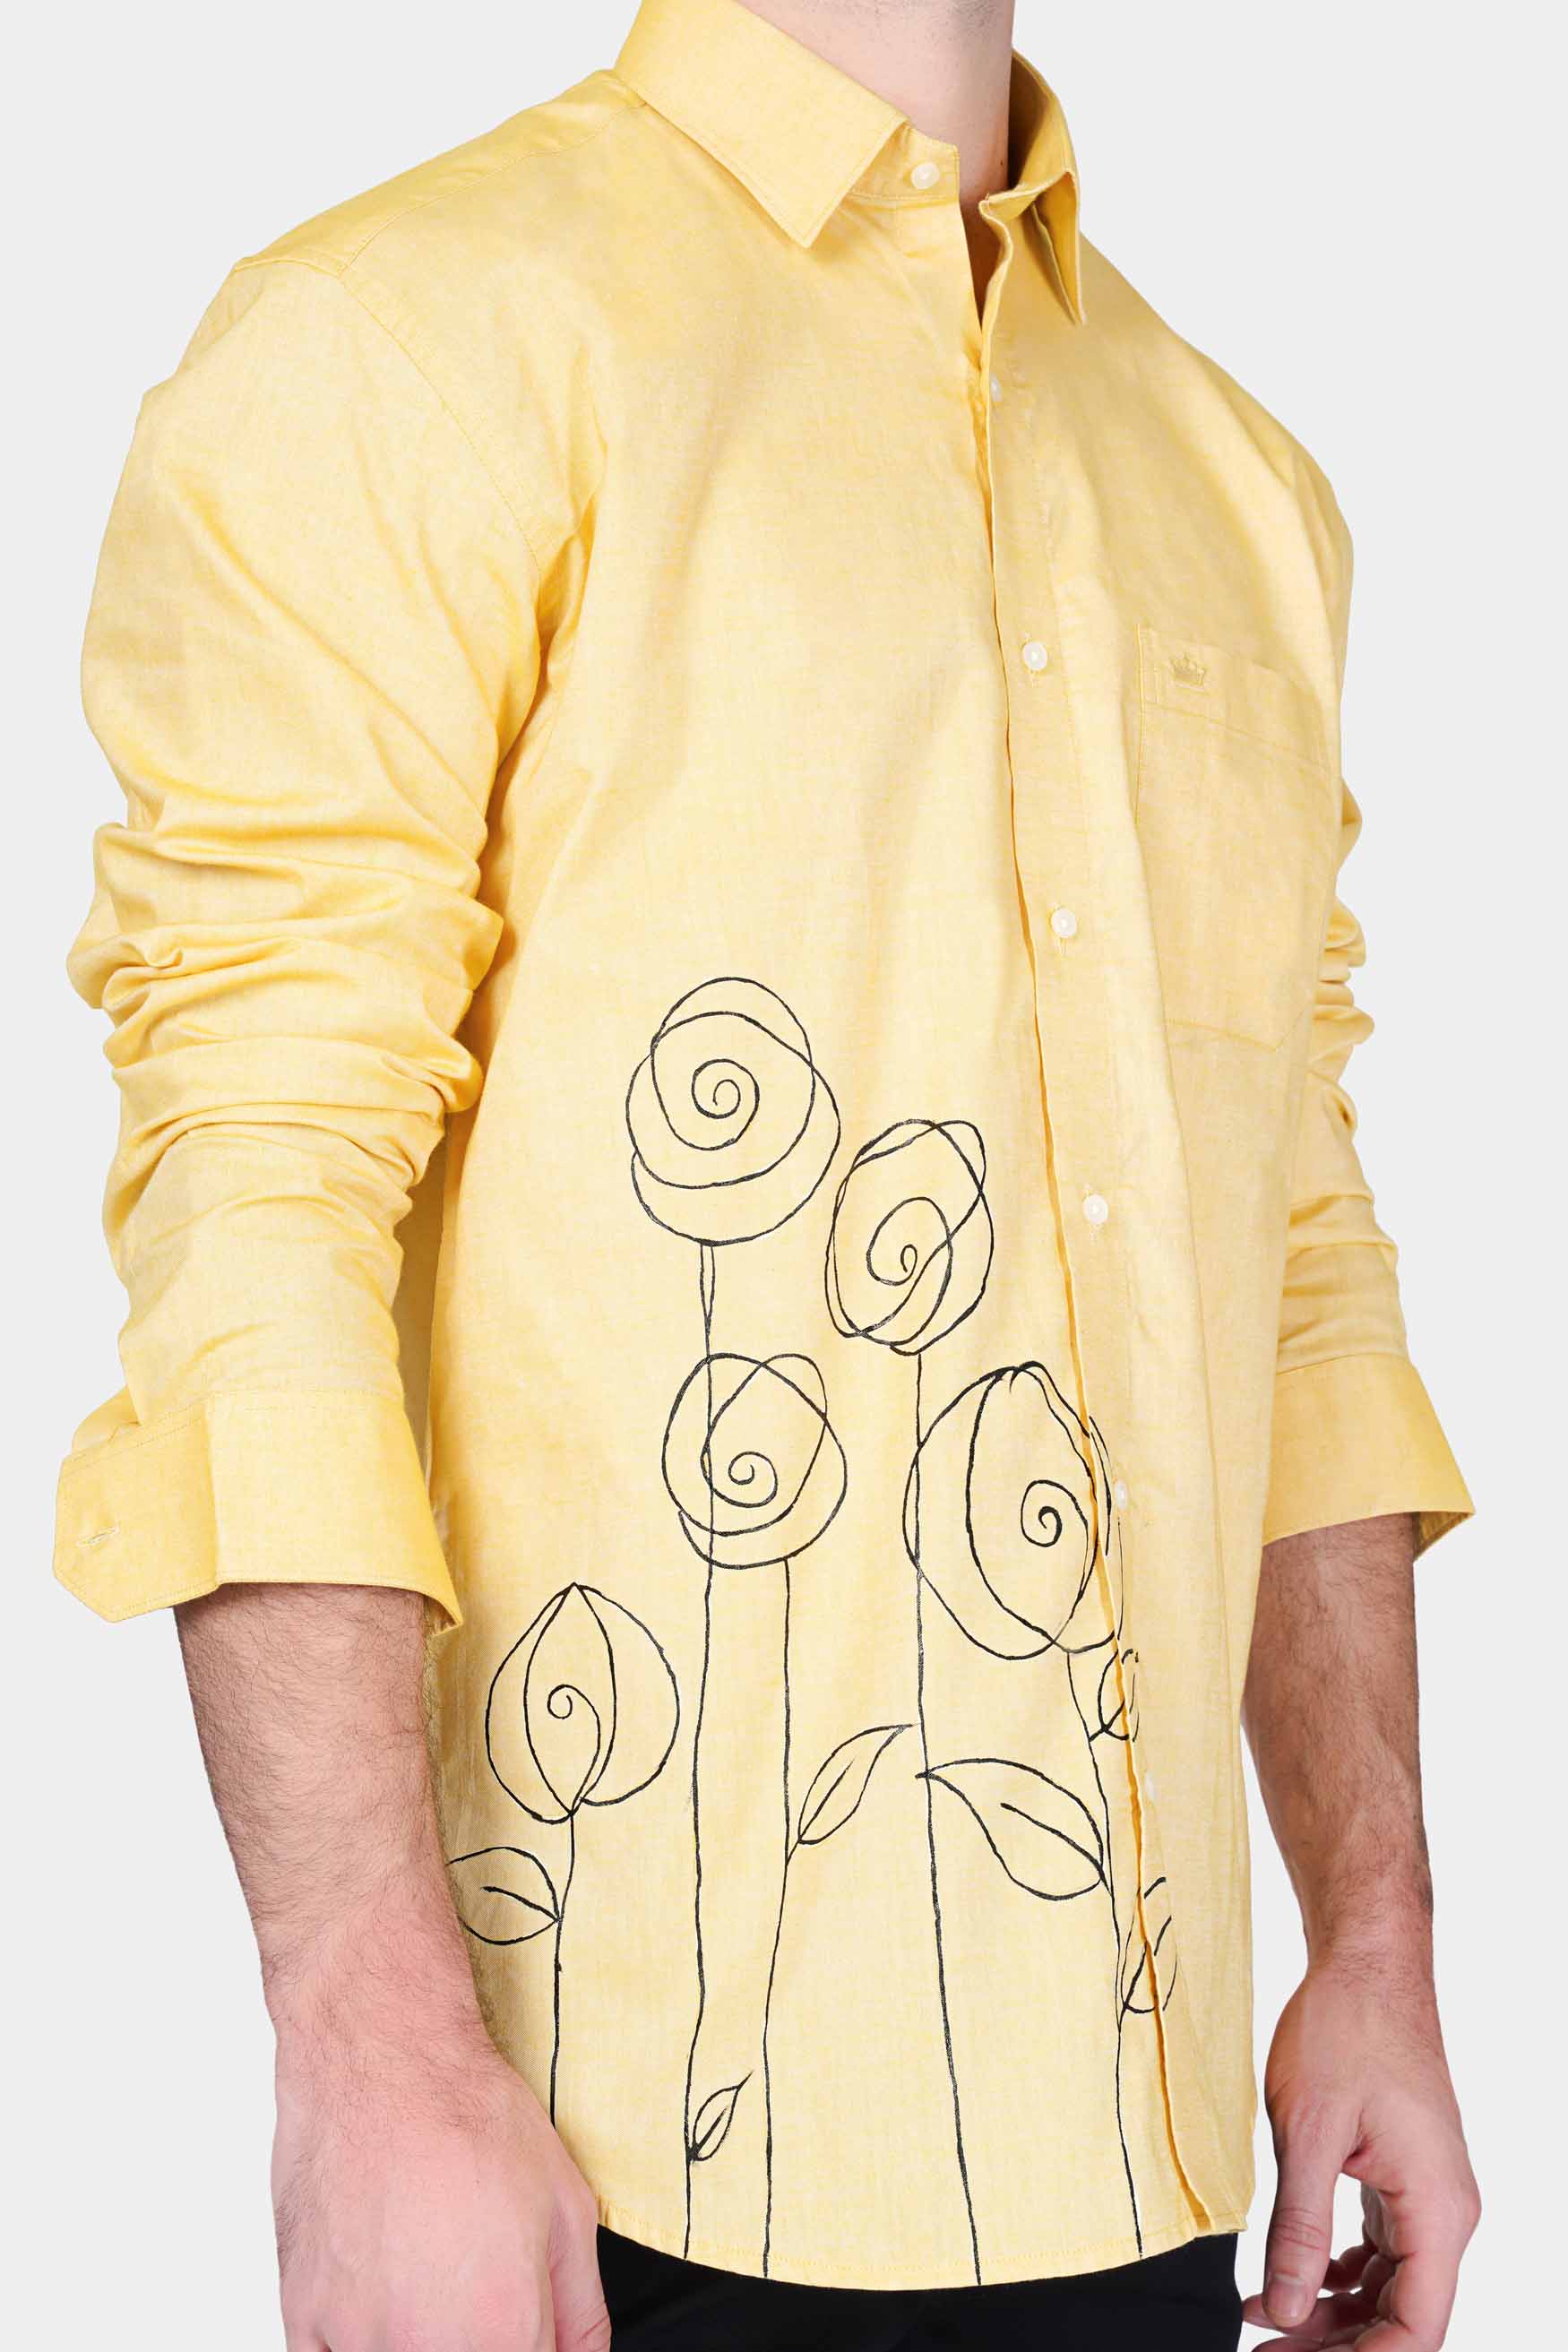 Brulee Yellow Floral Hand Painted Royal Oxford Designer Shirt 9651-ART-38, 9651-ART-H-38, 9651-ART-39, 9651-ART-H-39, 9651-ART-40, 9651-ART-H-40, 9651-ART-42, 9651-ART-H-42, 9651-ART-44, 9651-ART-H-44, 9651-ART-46, 9651-ART-H-46, 9651-ART-48, 9651-ART-H-48, 9651-ART-50, 9651-ART-H-50, 9651-ART-52, 9651-ART-H-52